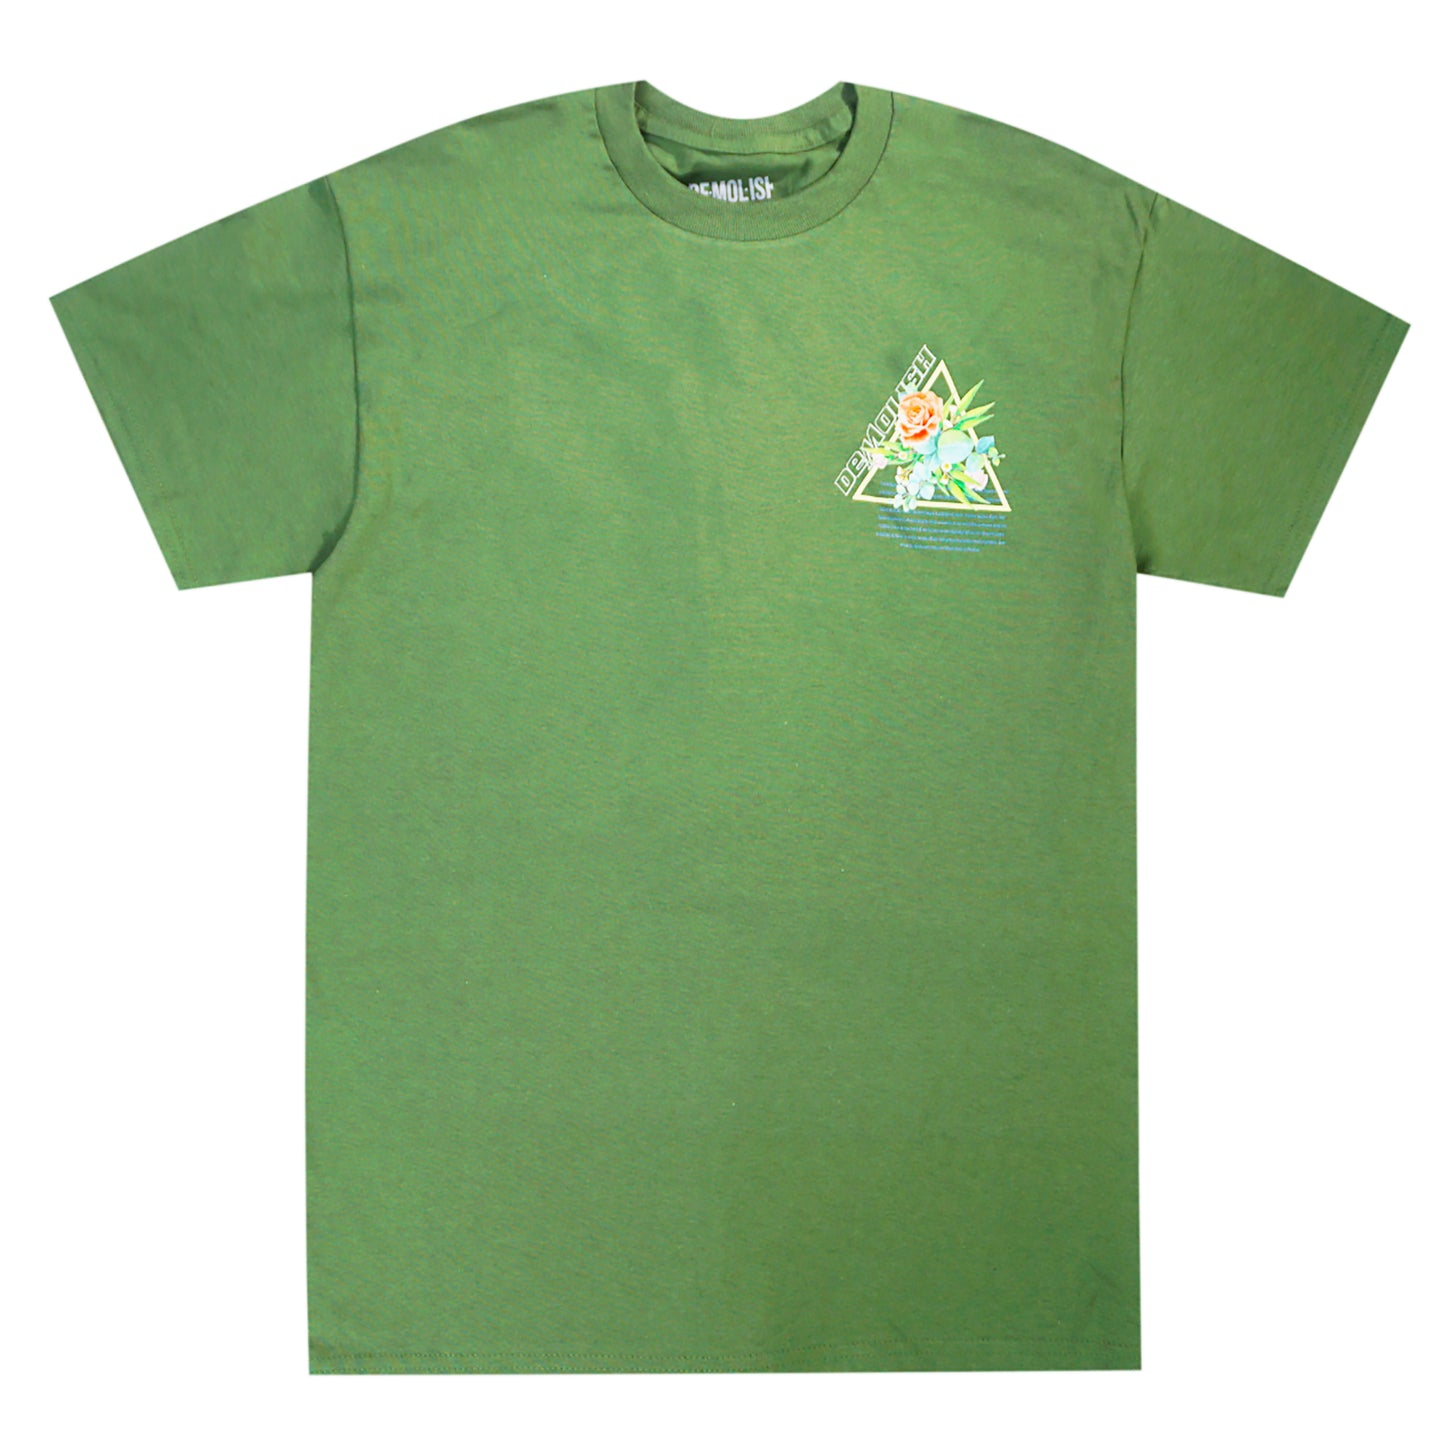 Start Your Journey Tee (Olive/Multi) /D17